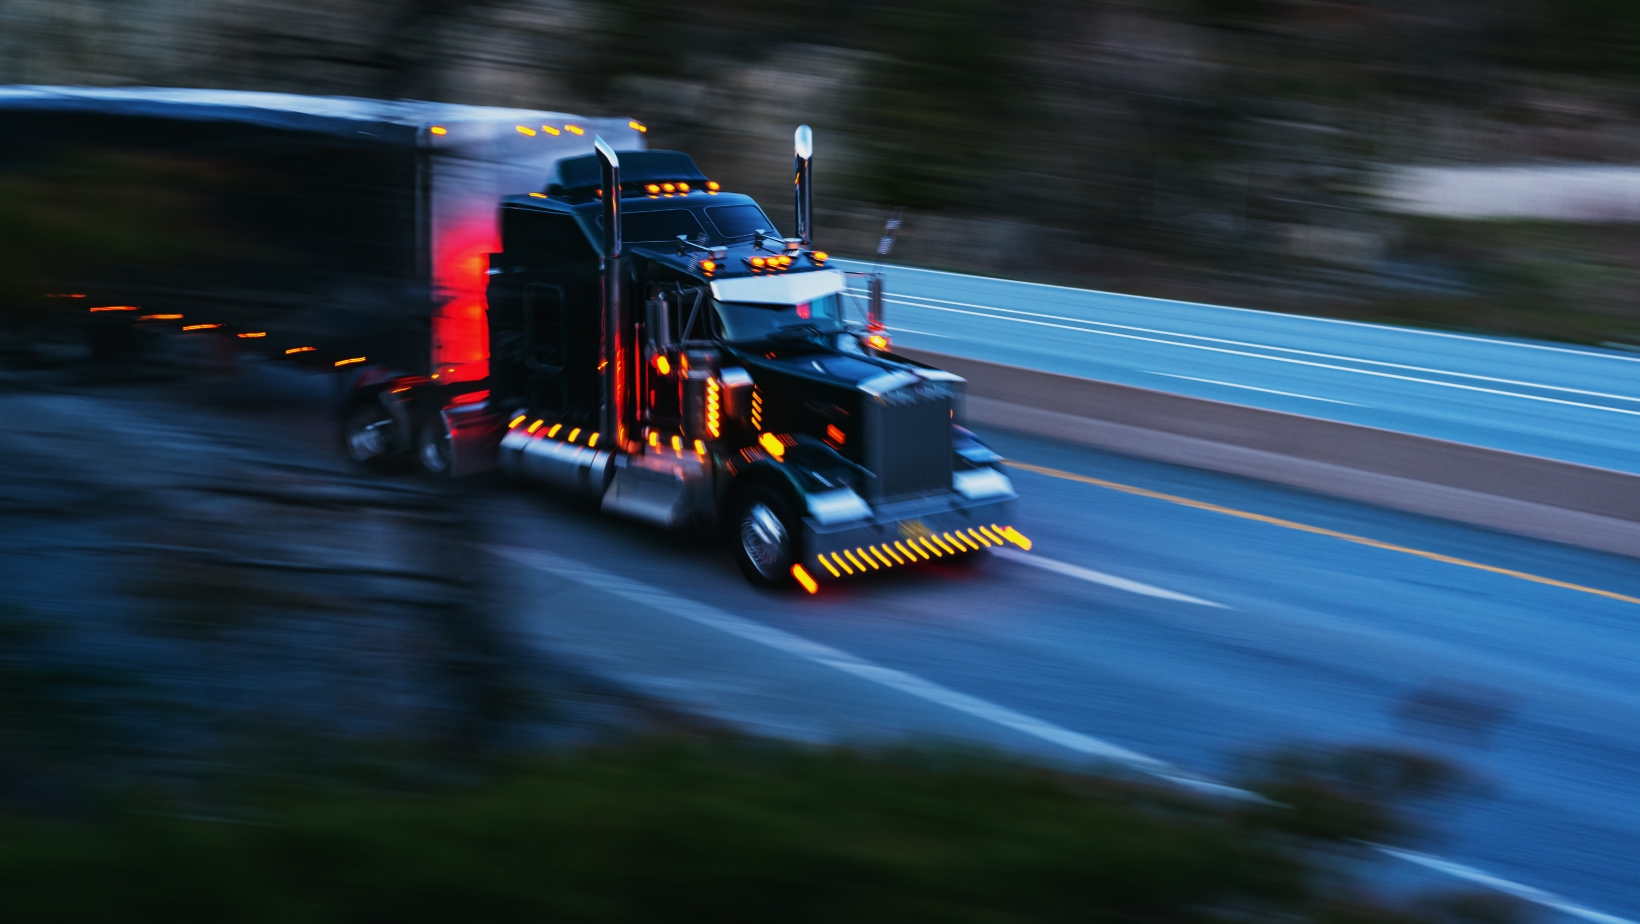 TRENDS SHAPING THE TRUCKING INDUSTRY